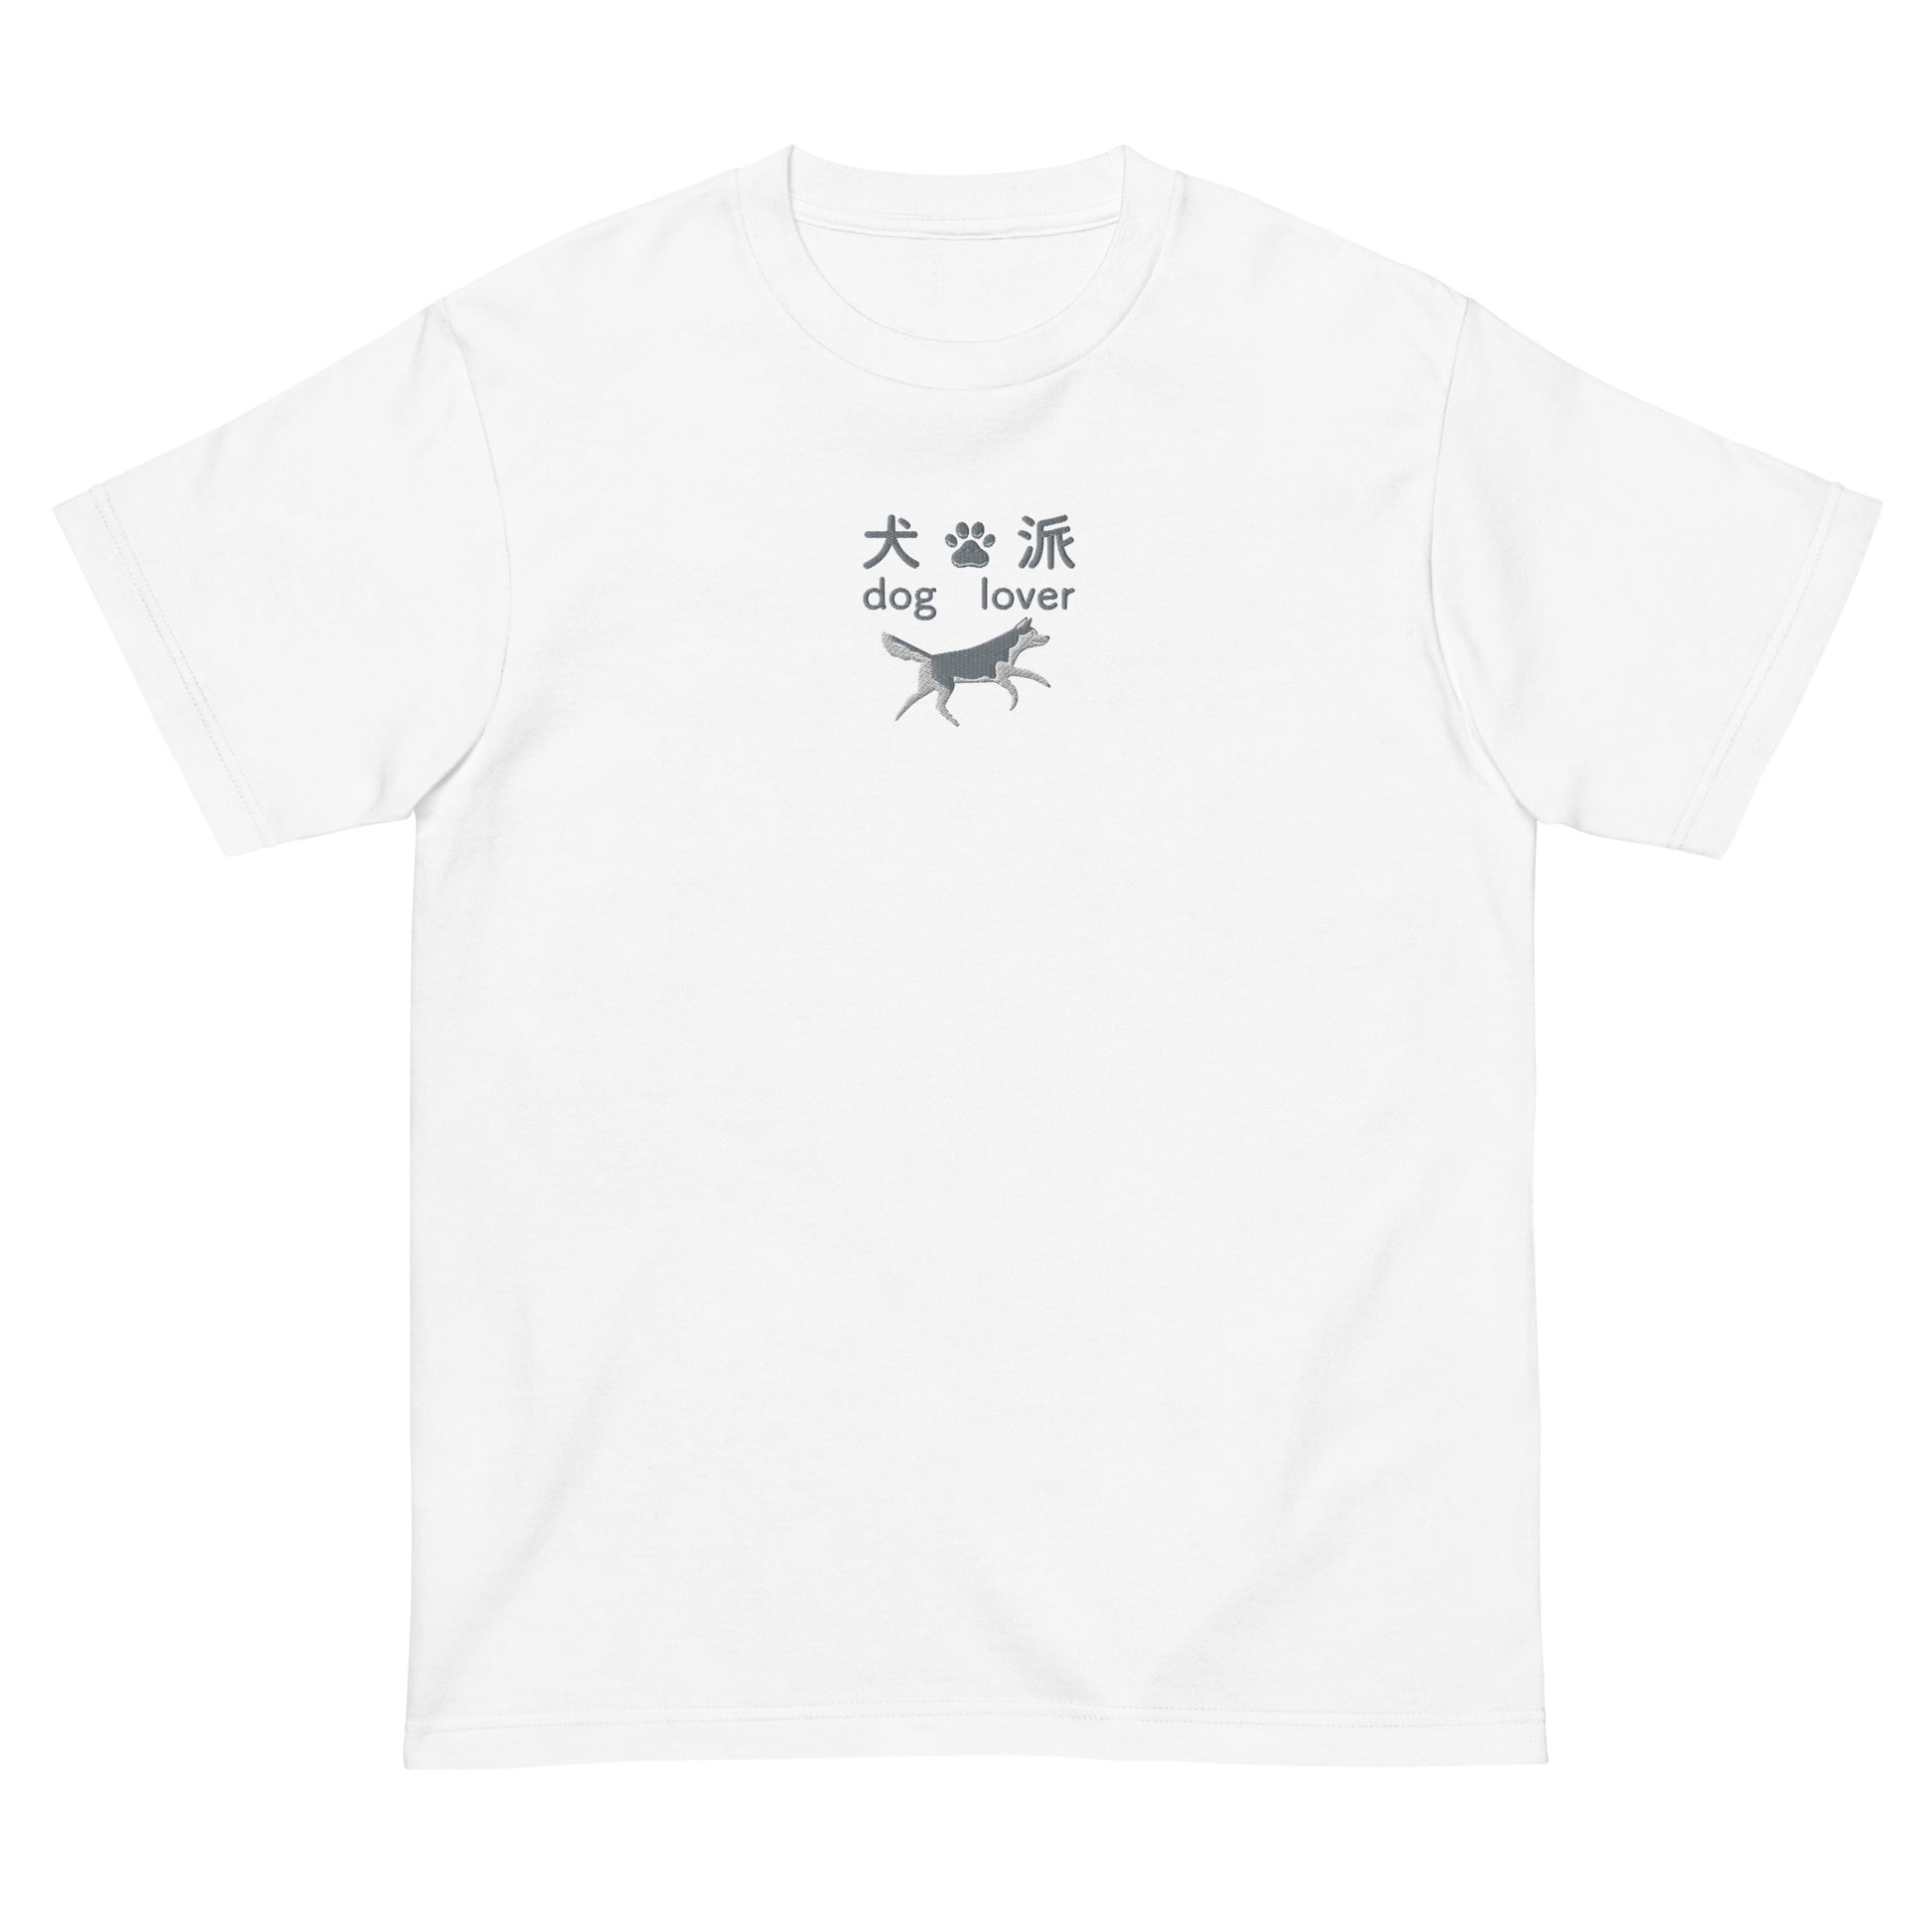 White High Quality Tee - Front Design with an Gray, White Embroidery "Dog Lover" in Japanese,Chinese and English, and Dog Embroidery